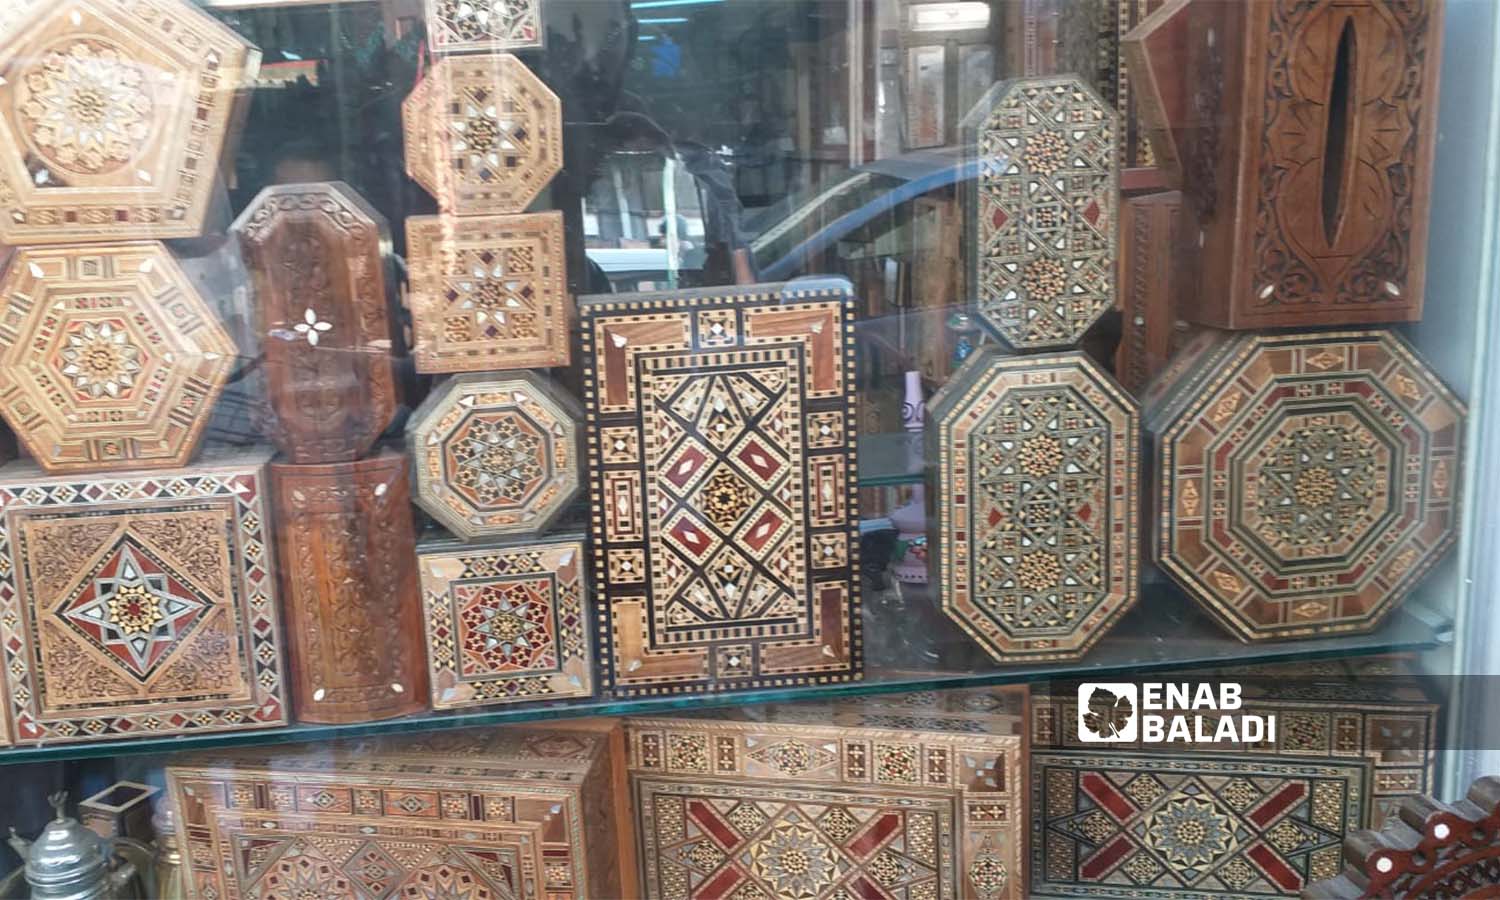 A mosaic showroom in Midhat Pasha souq in the Old City of Damascus (Enab Baladi - Hassan Hassan)